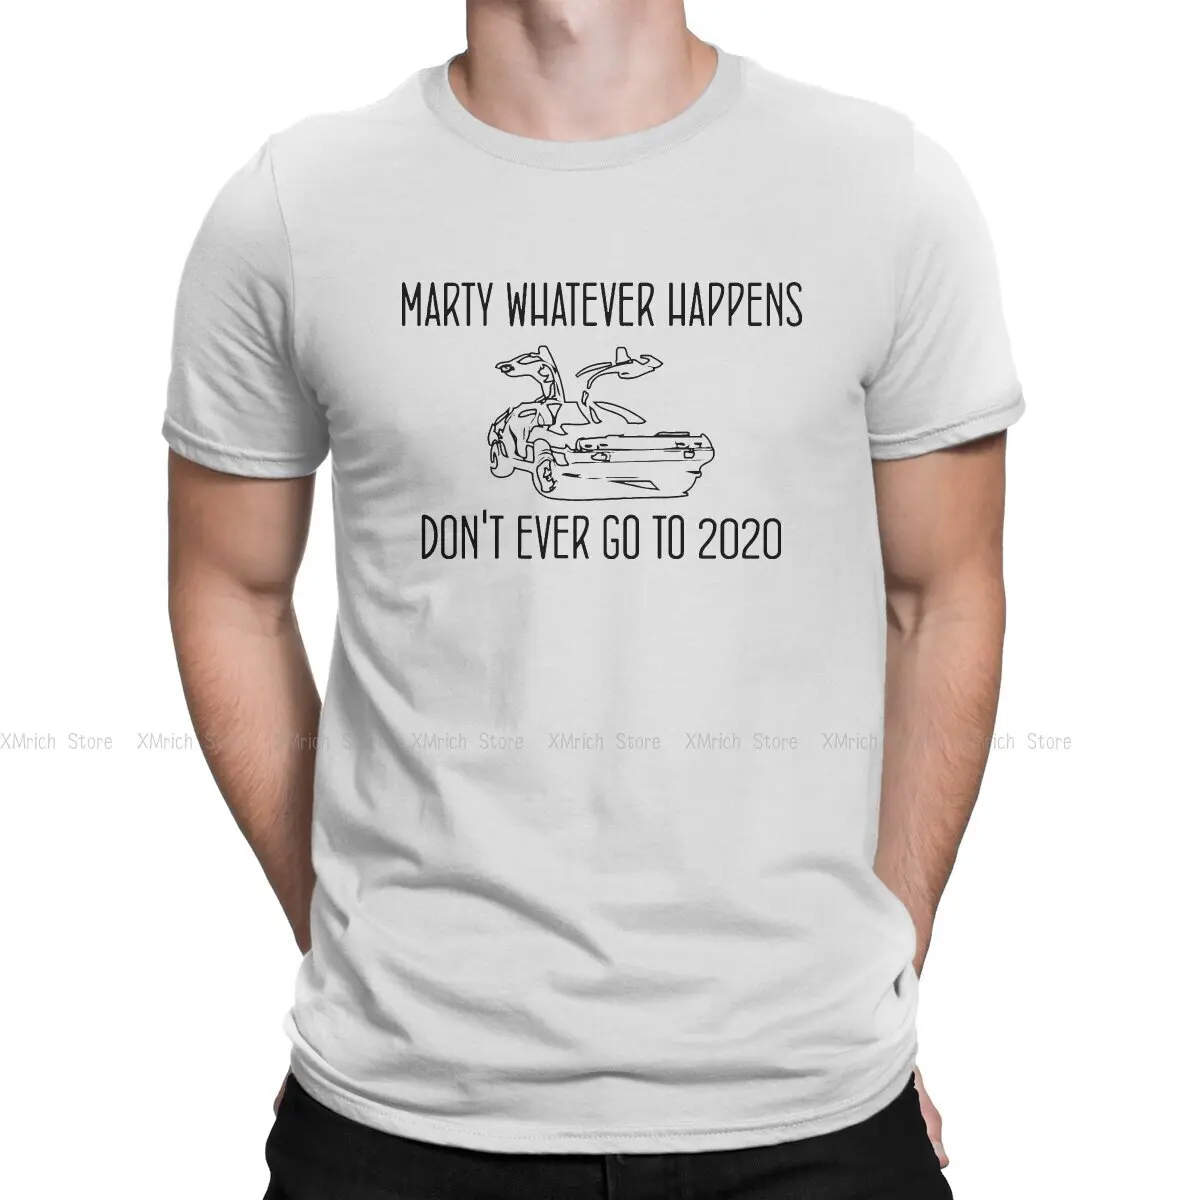 

Marty Whatever Happens Don't Ever Go To 2020 Black Hip Hop Back to the Future Film Casual T Shirt Summer T-shirt For Men Women